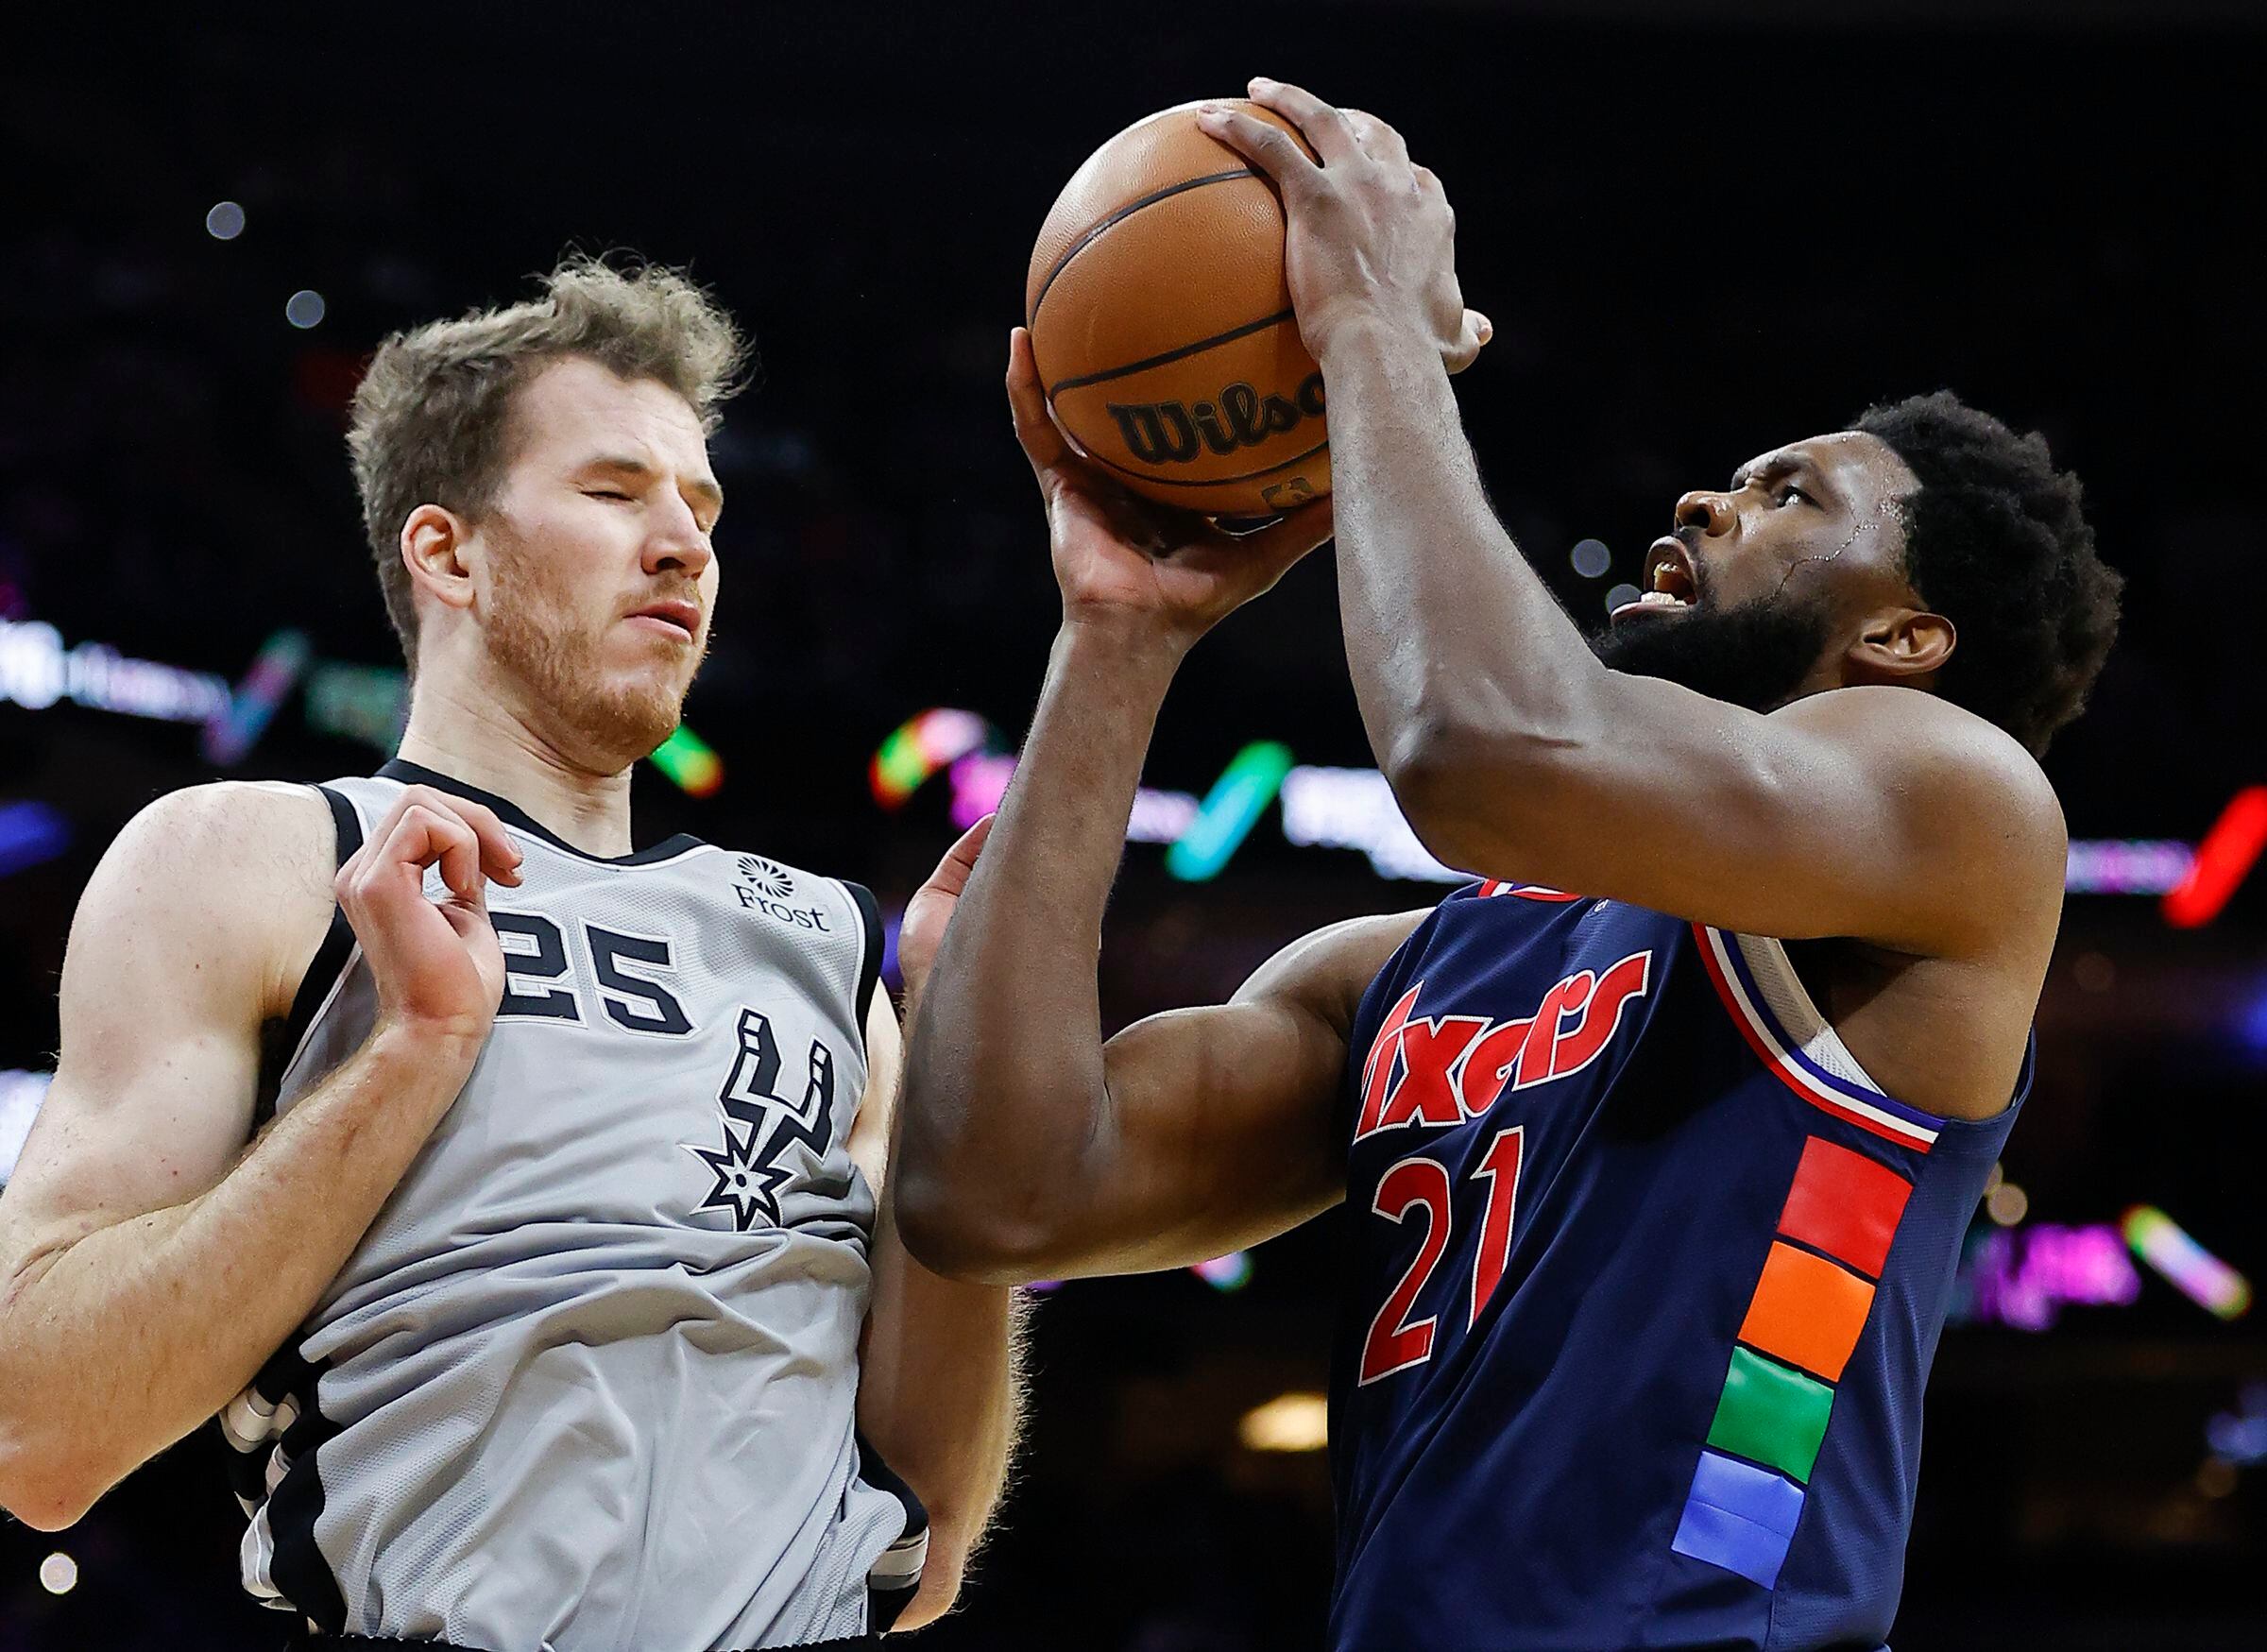 NBA Wrap: Mills lifts Spurs but definitely cannot dunk, Embiid